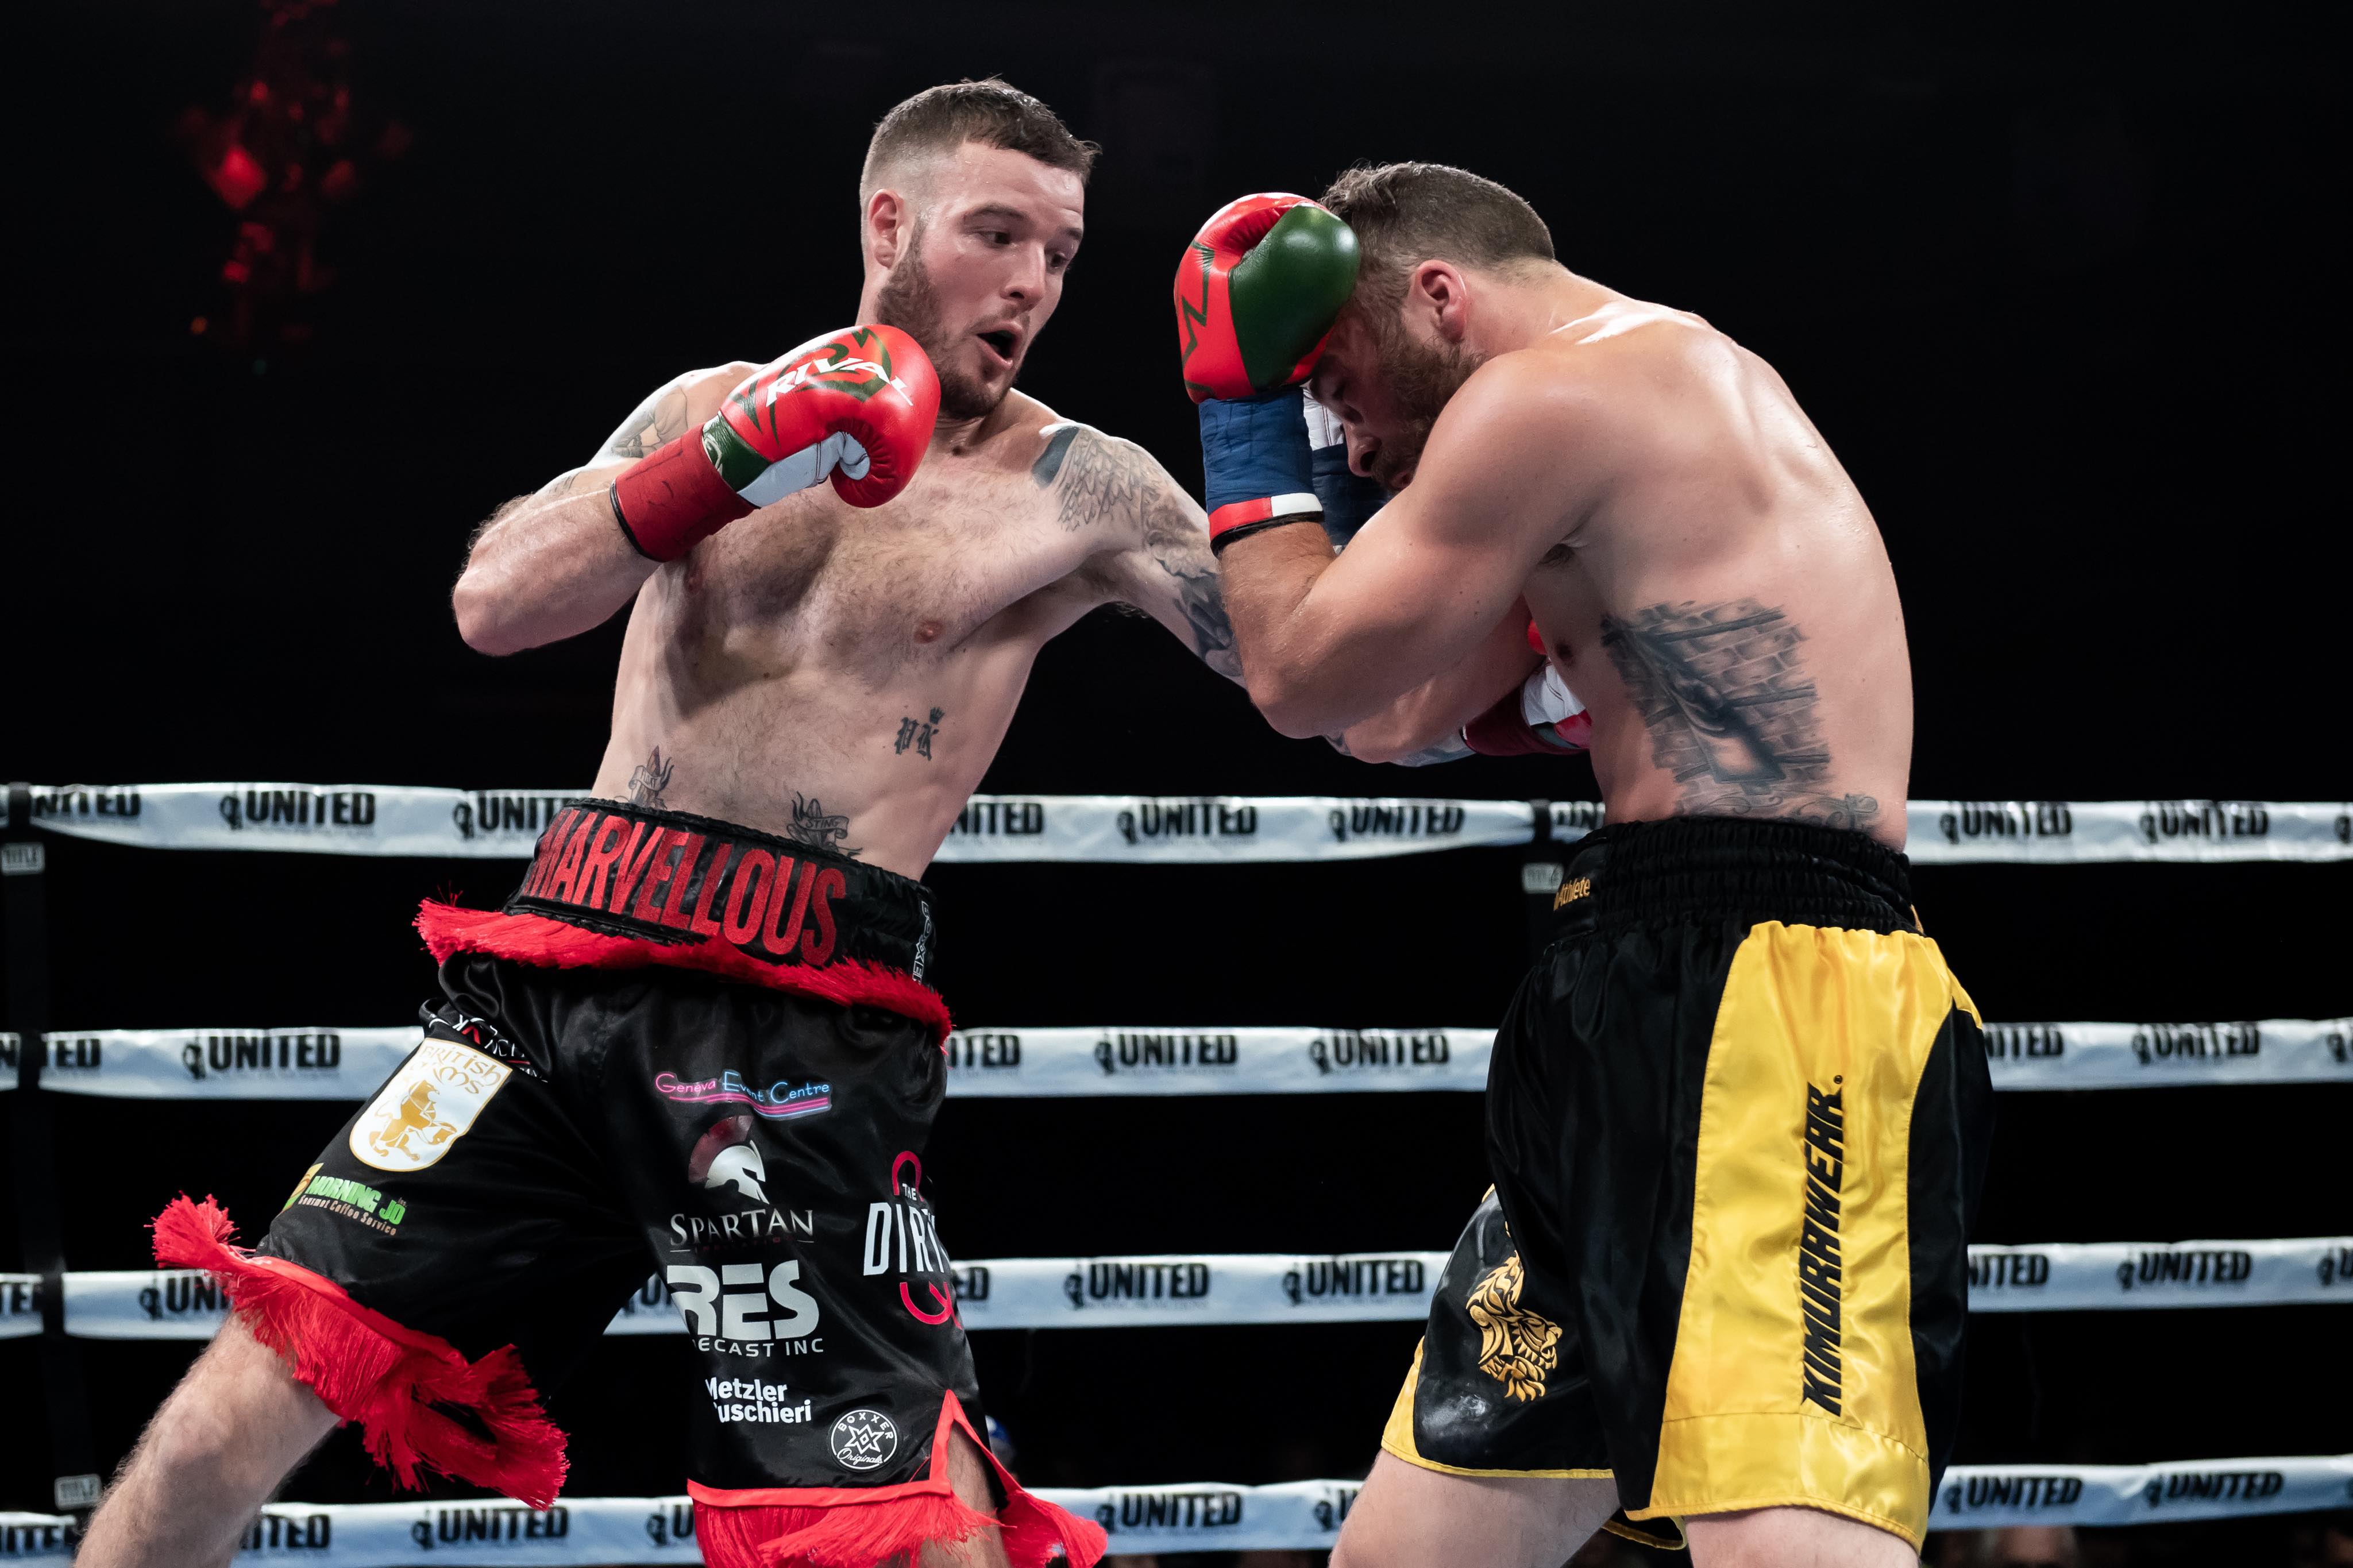 Fight night: Barrie boxer going for Canadian super-lightweight title -  Barrie News